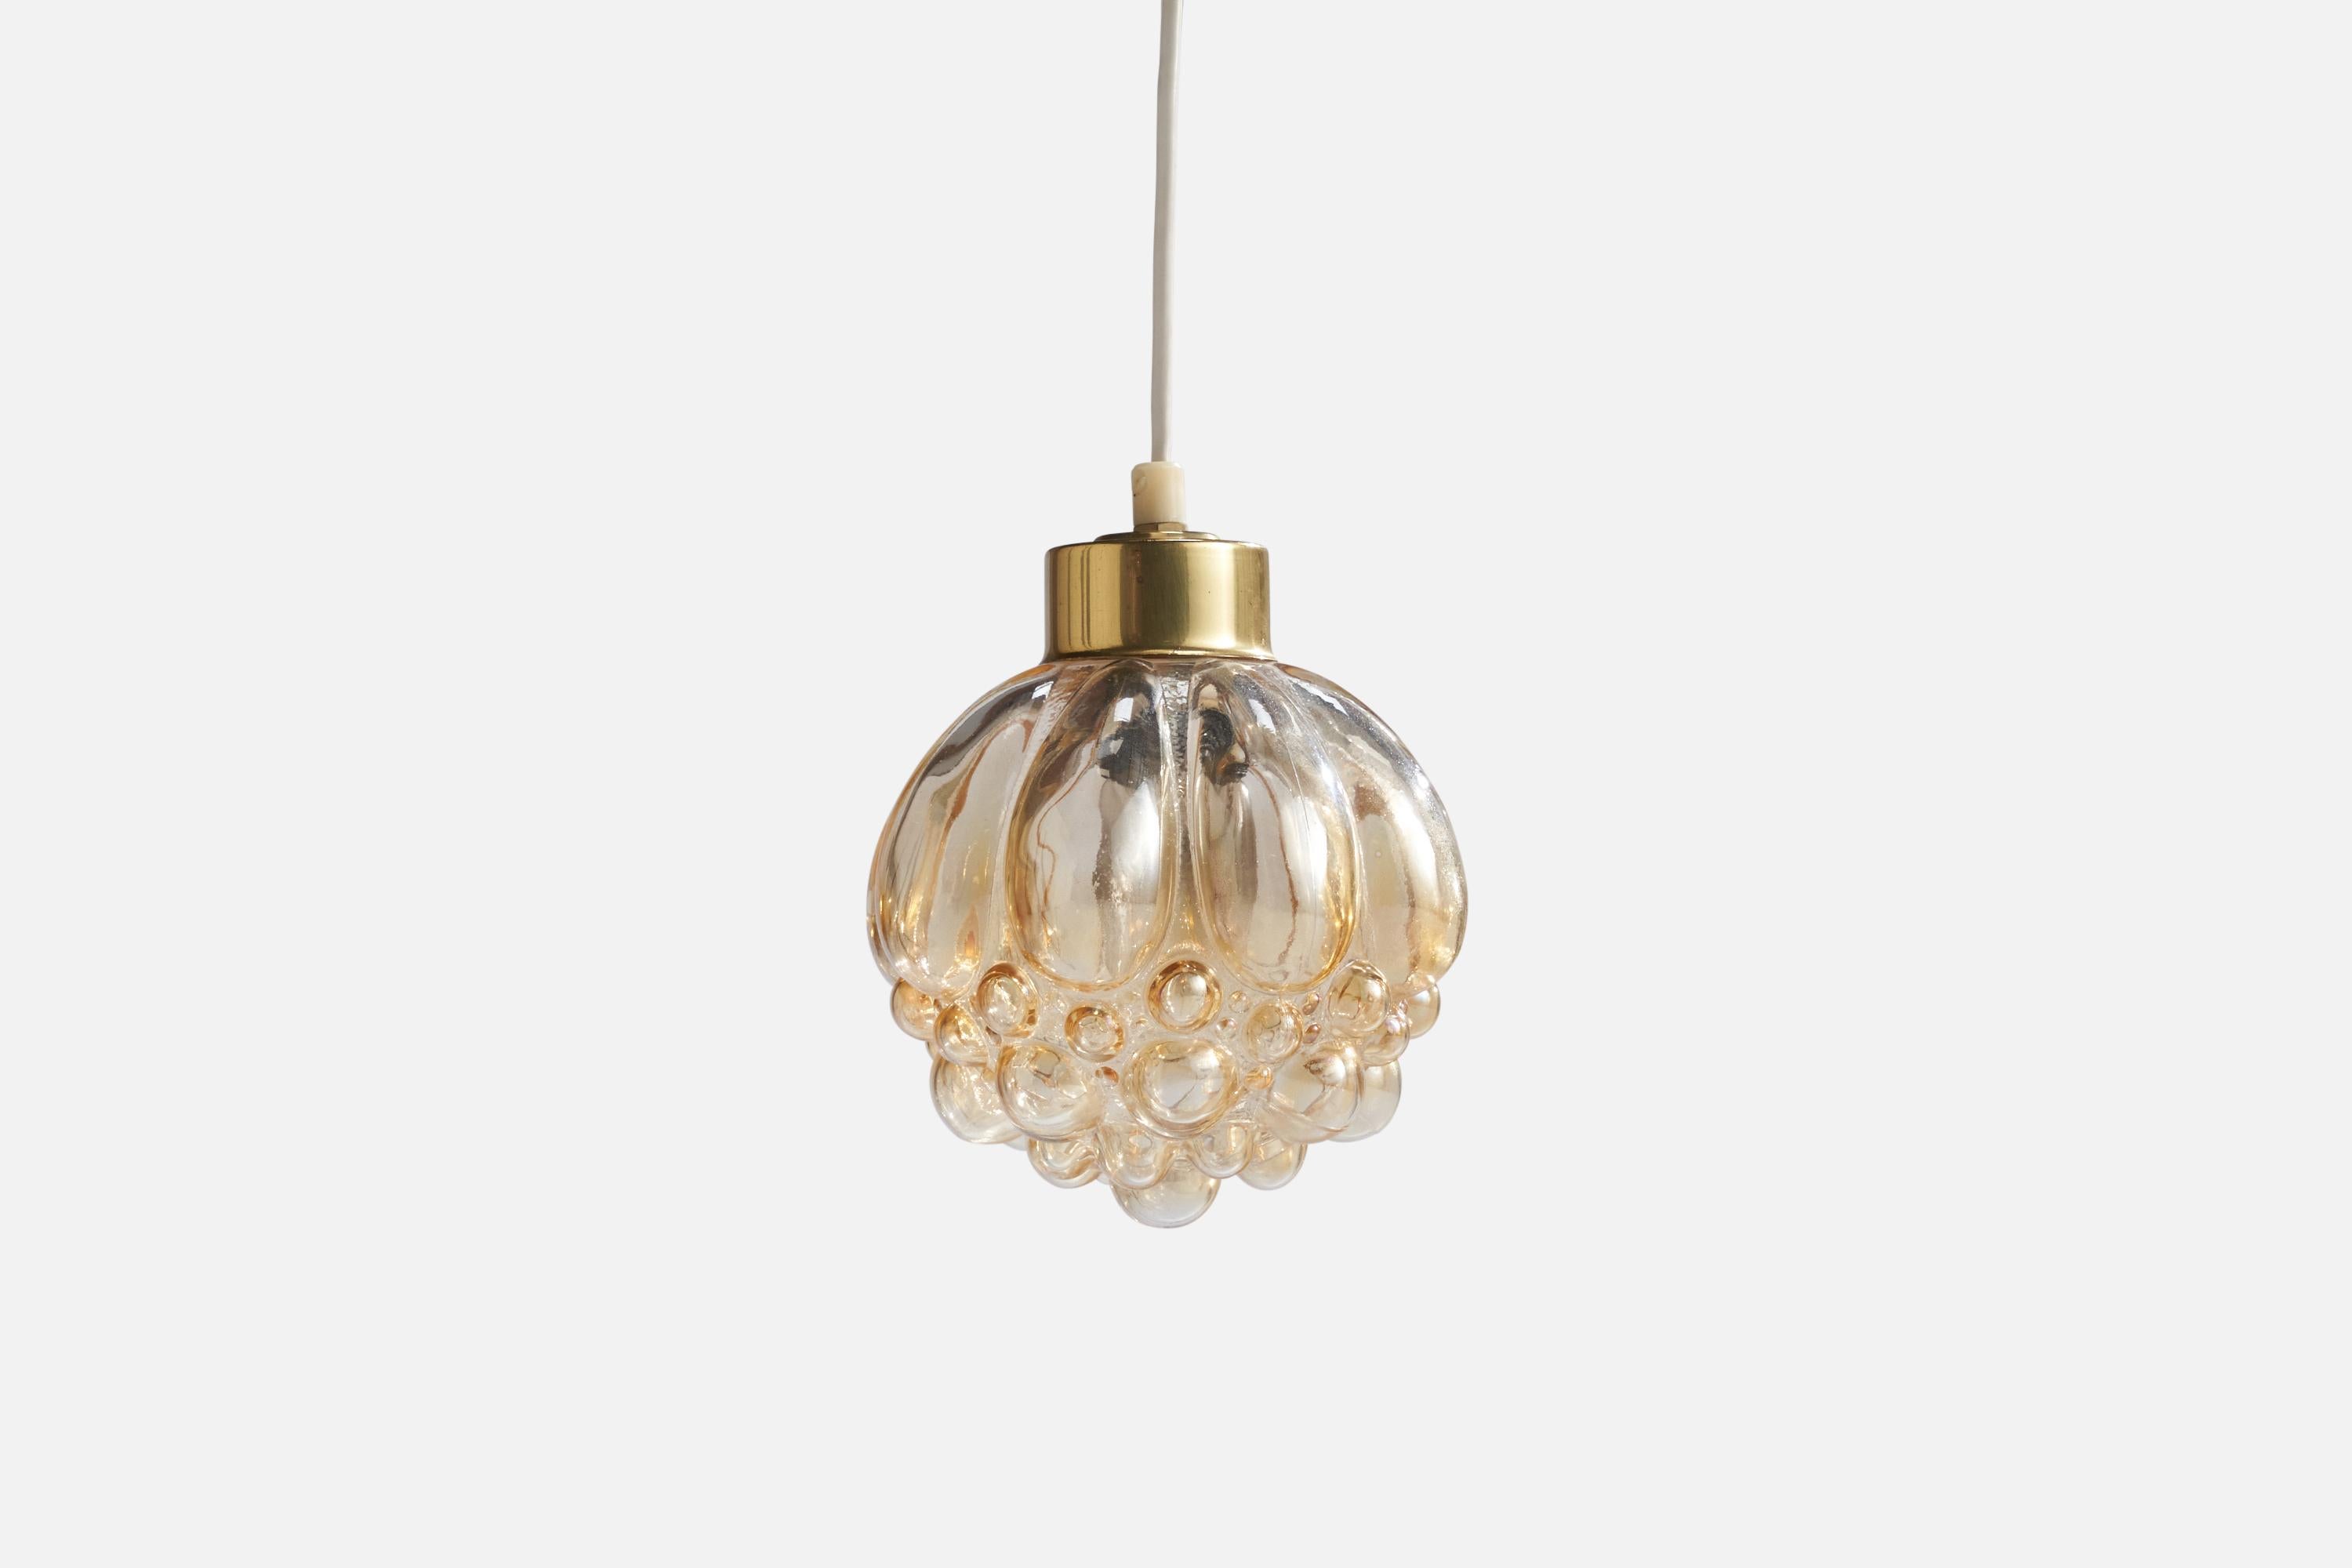 A brass and glass pendant attributed to Helena Tynell for Glashütte Limburg, Germany, 1950s.

Dimensions of canopy (inches): 6.5”  H x 5.75”  Diameter
Socket takes standard E-14 bulbs. 1 socket.There is no maximum wattage stated on the fixture. All